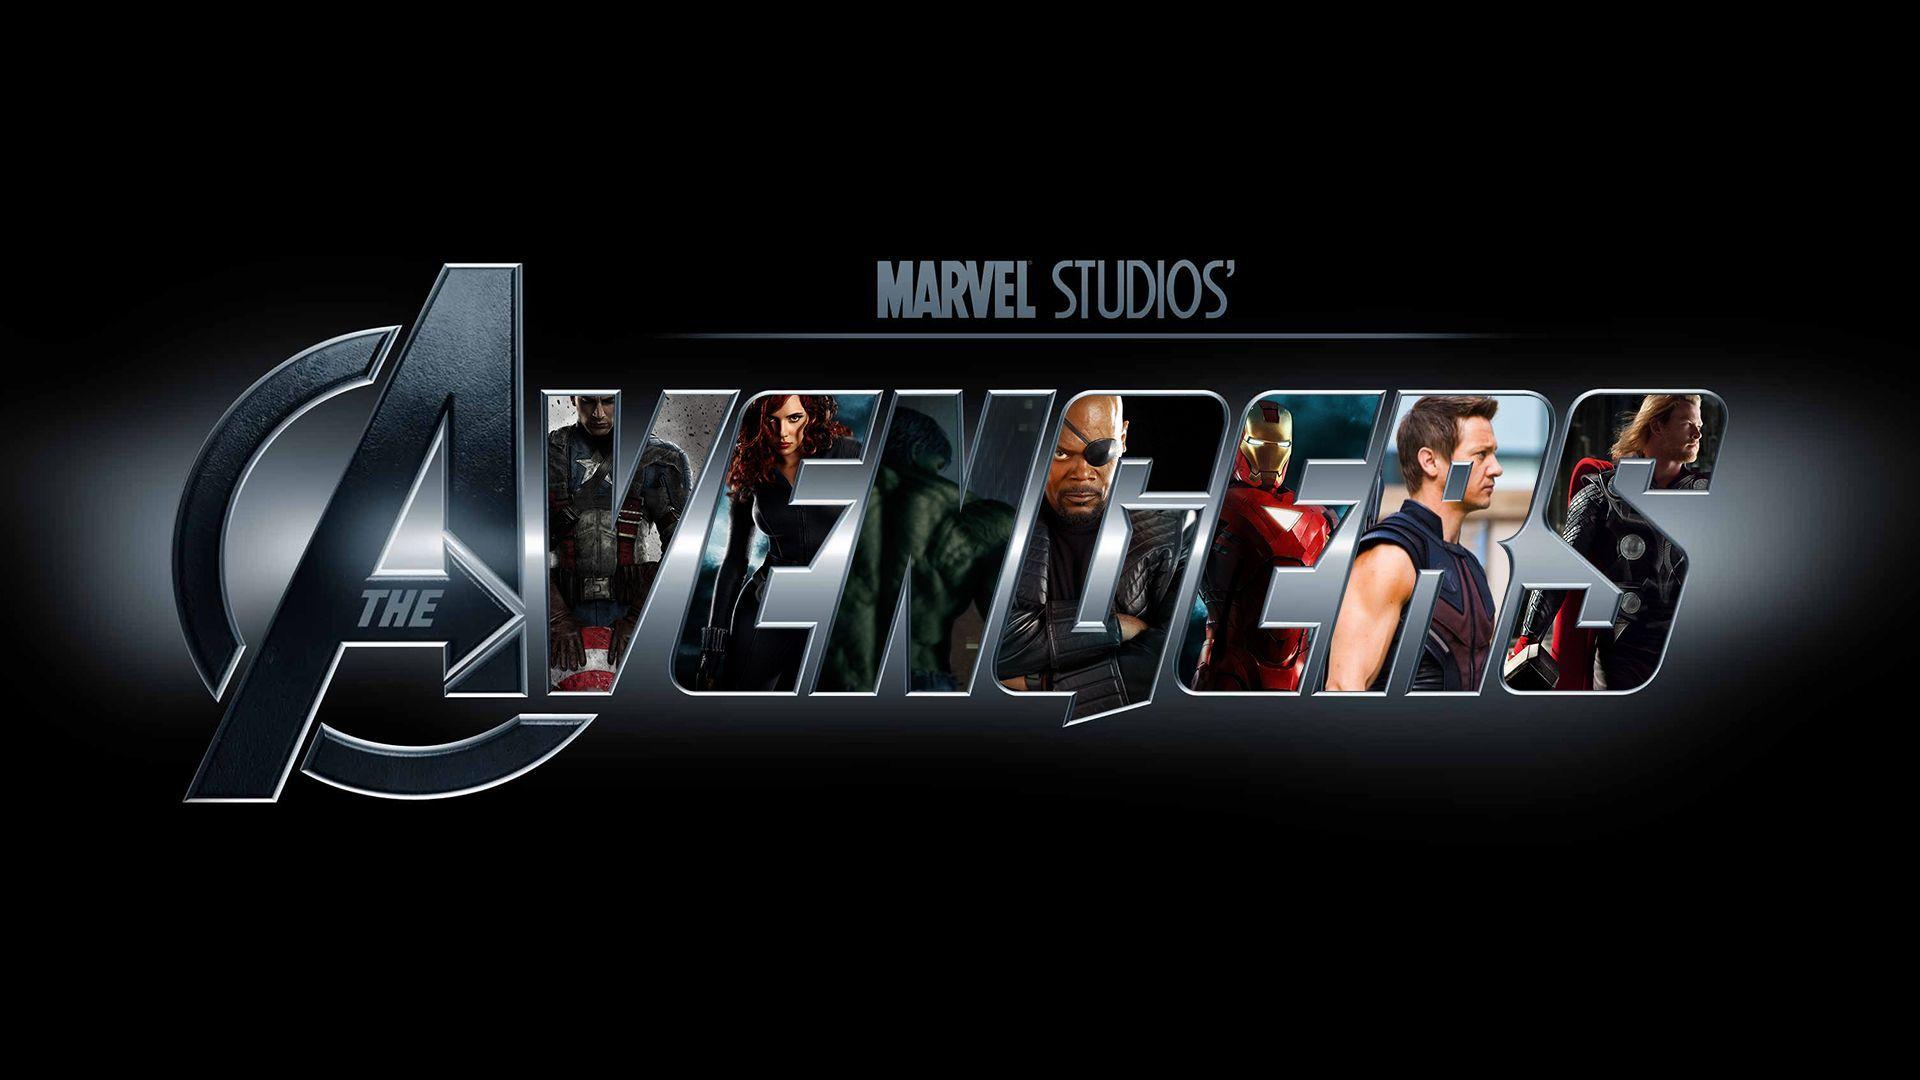 The Avengers download the new for android